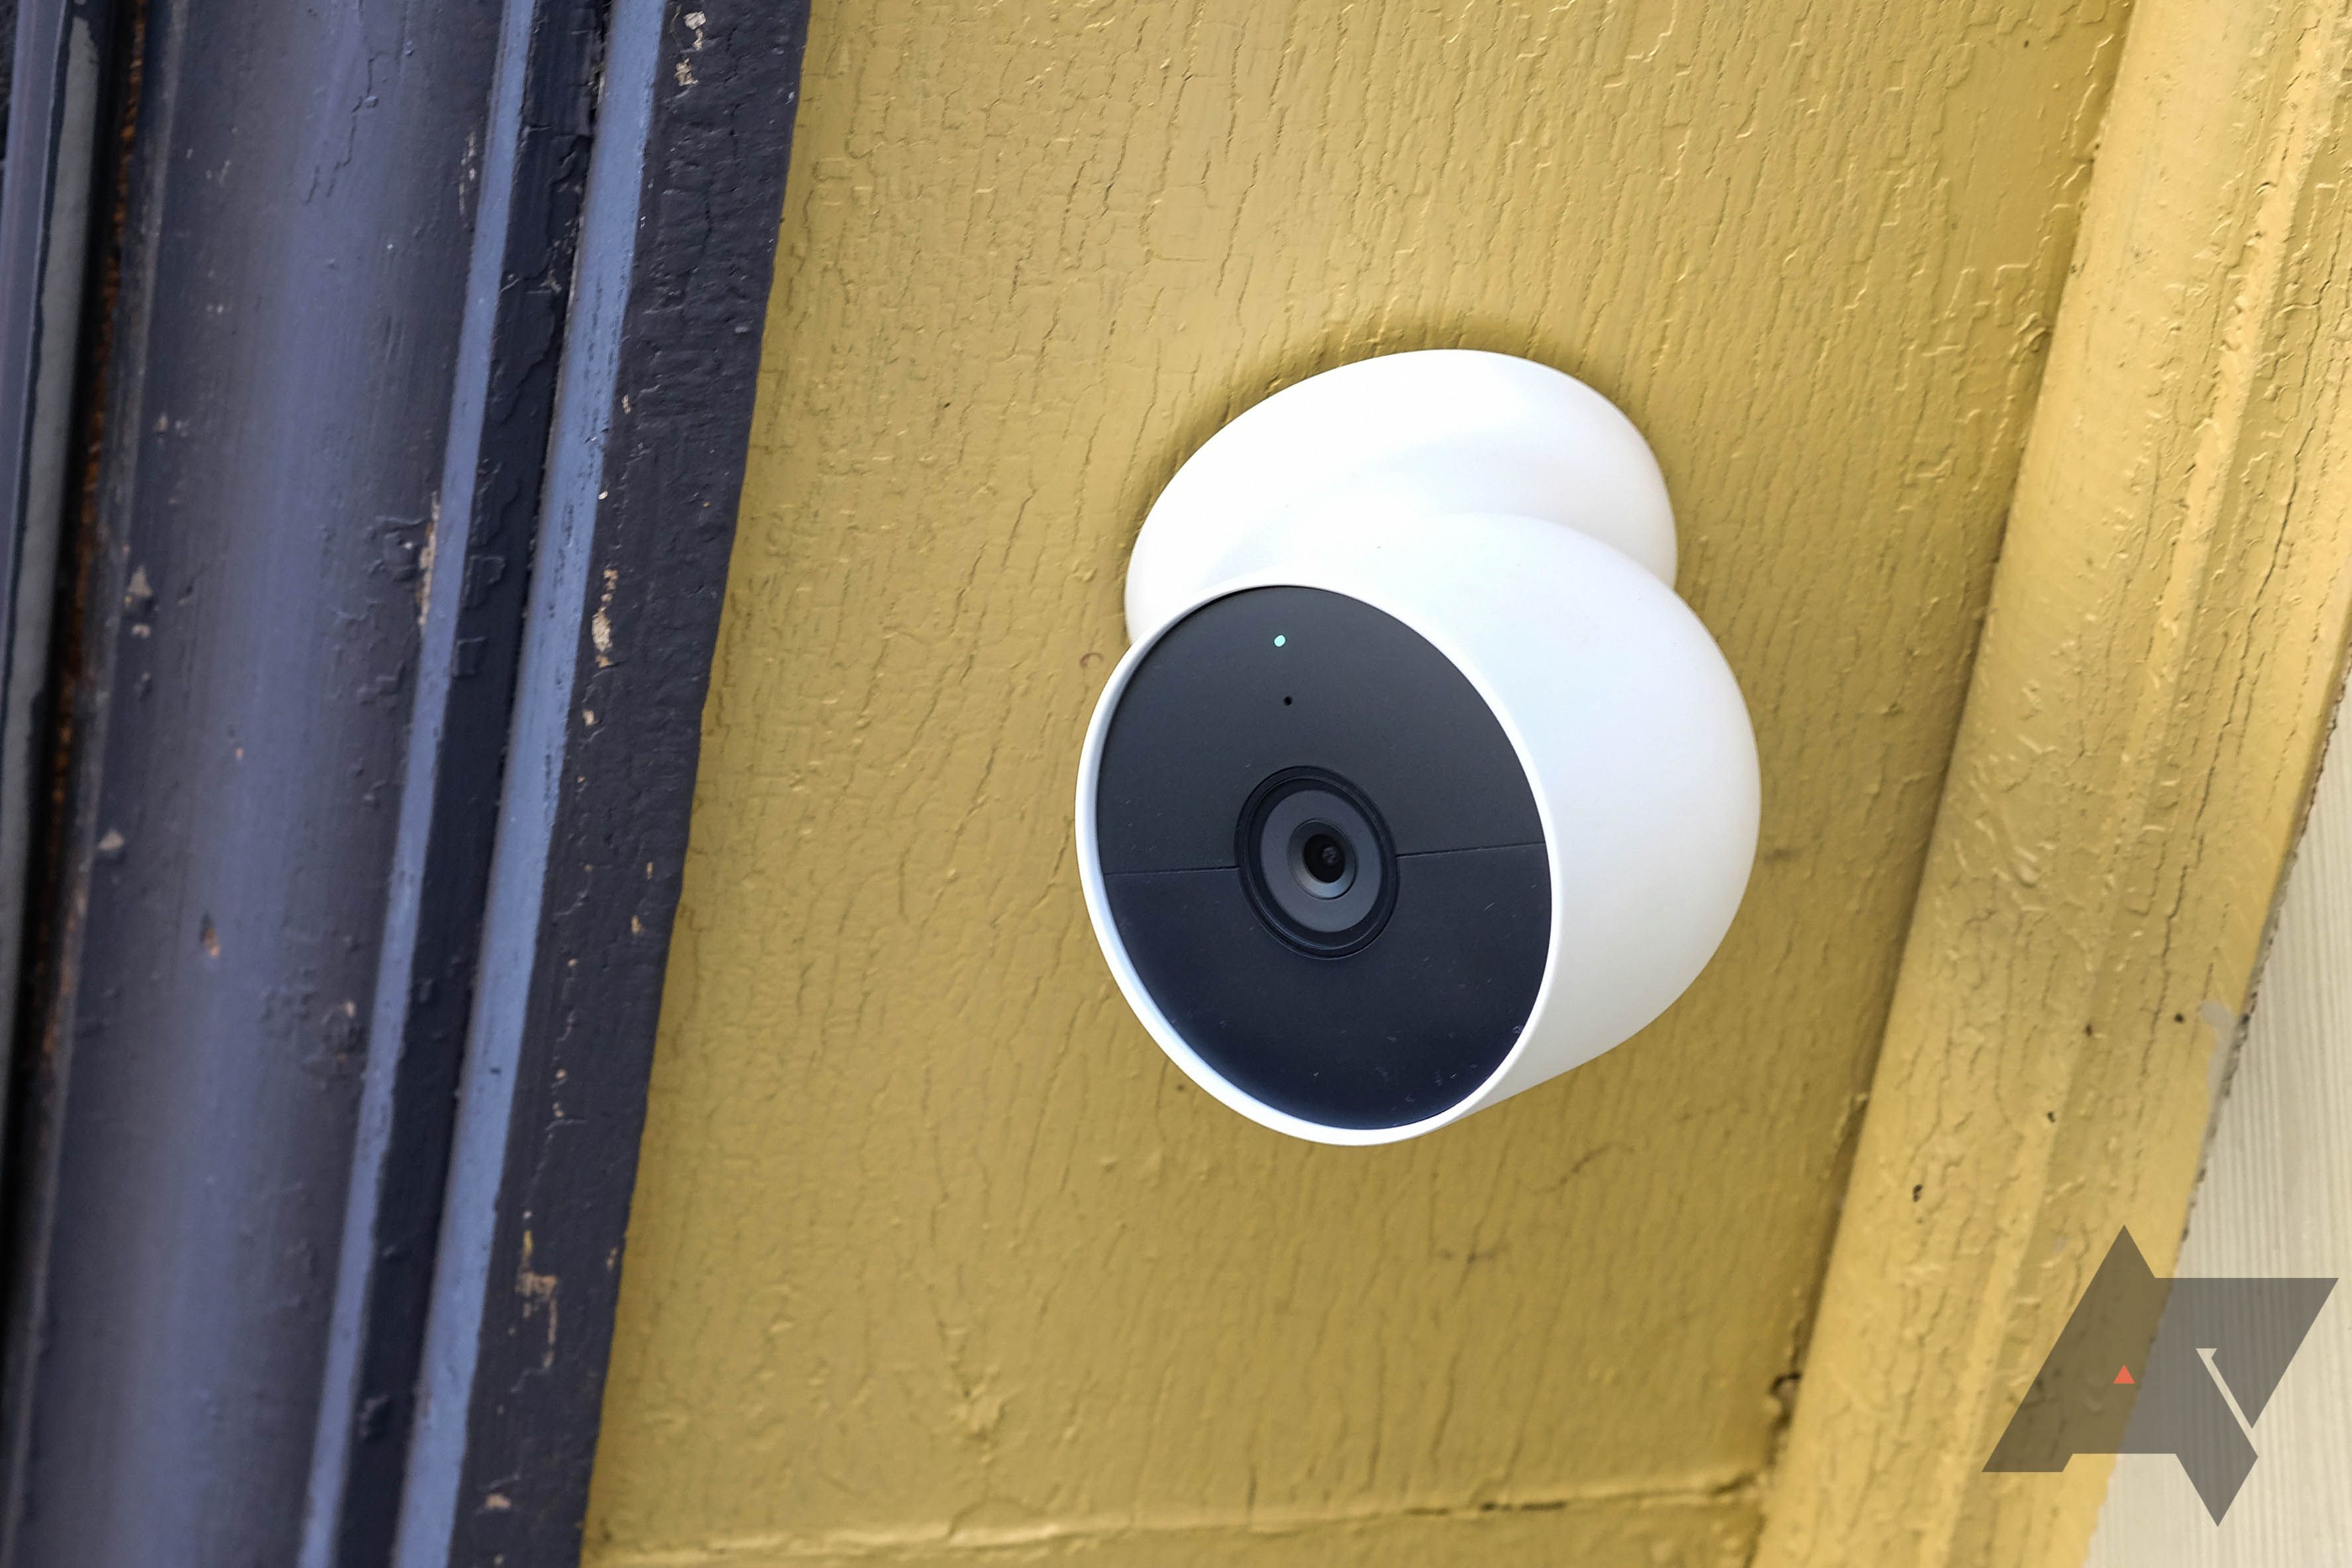 A Nest Cam Battery mounted outdoors.